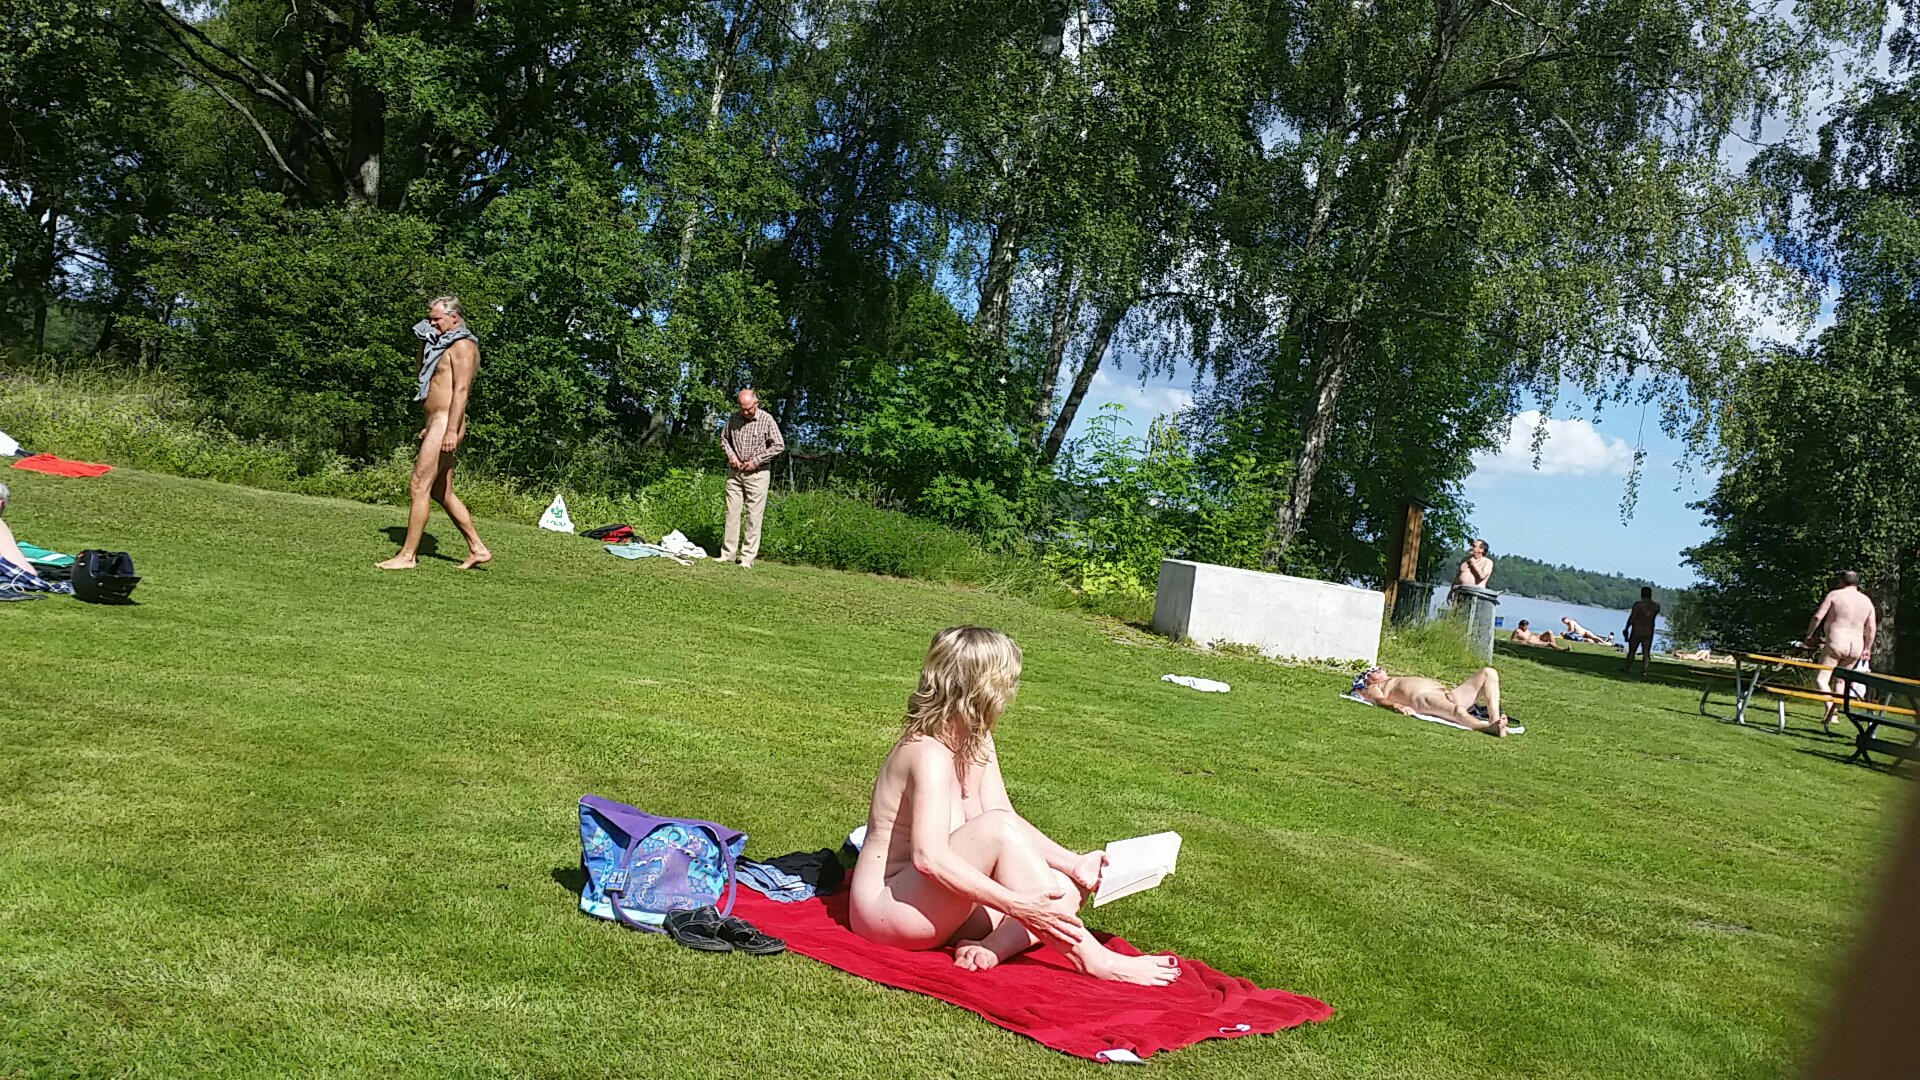 Formal nudist beach, operated by the city of Stockholm. 